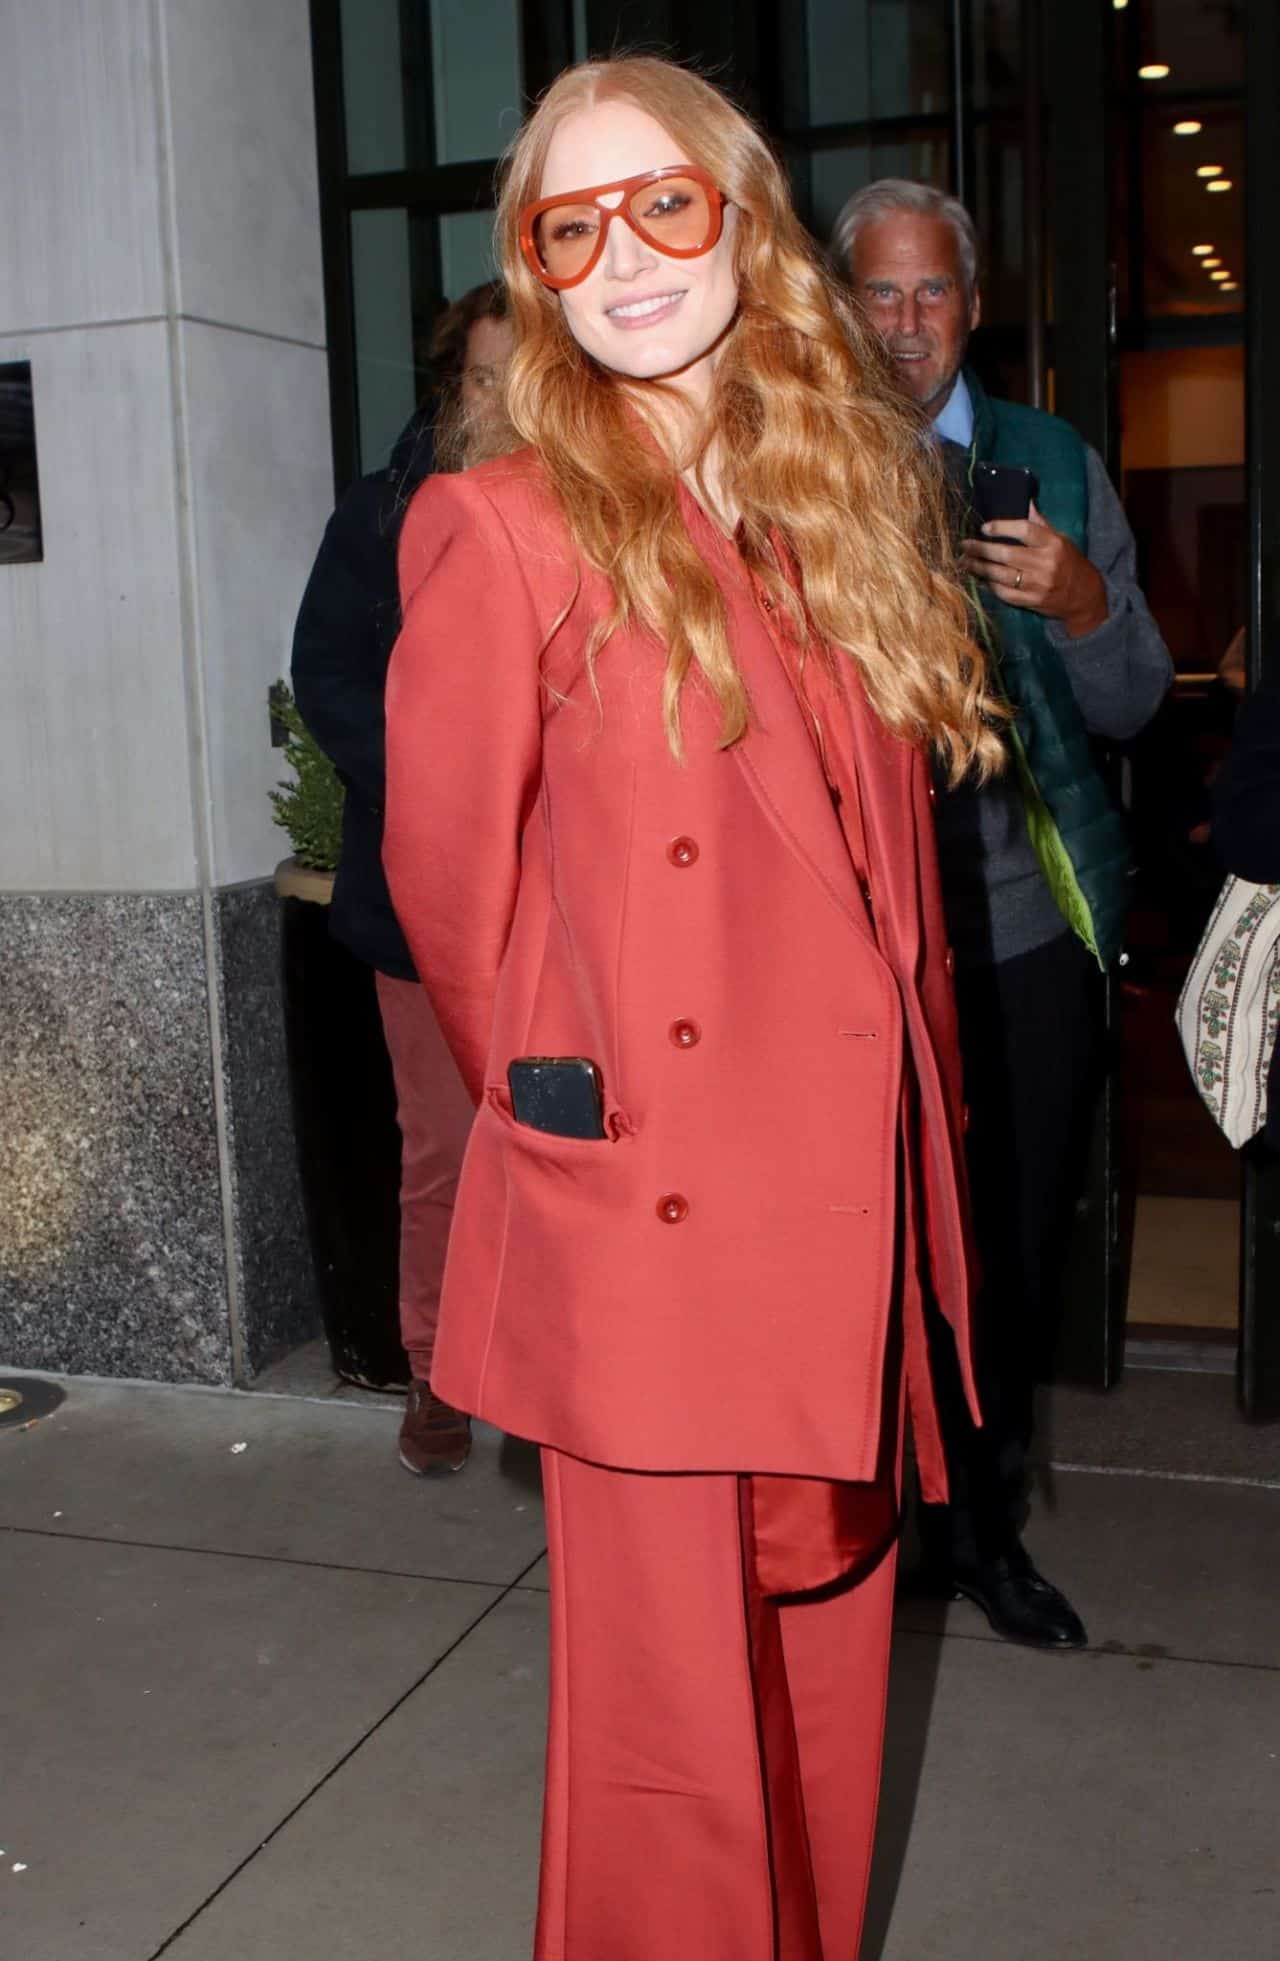 Jessica Chastain Rocks a Red 70s-Style Suit in New York